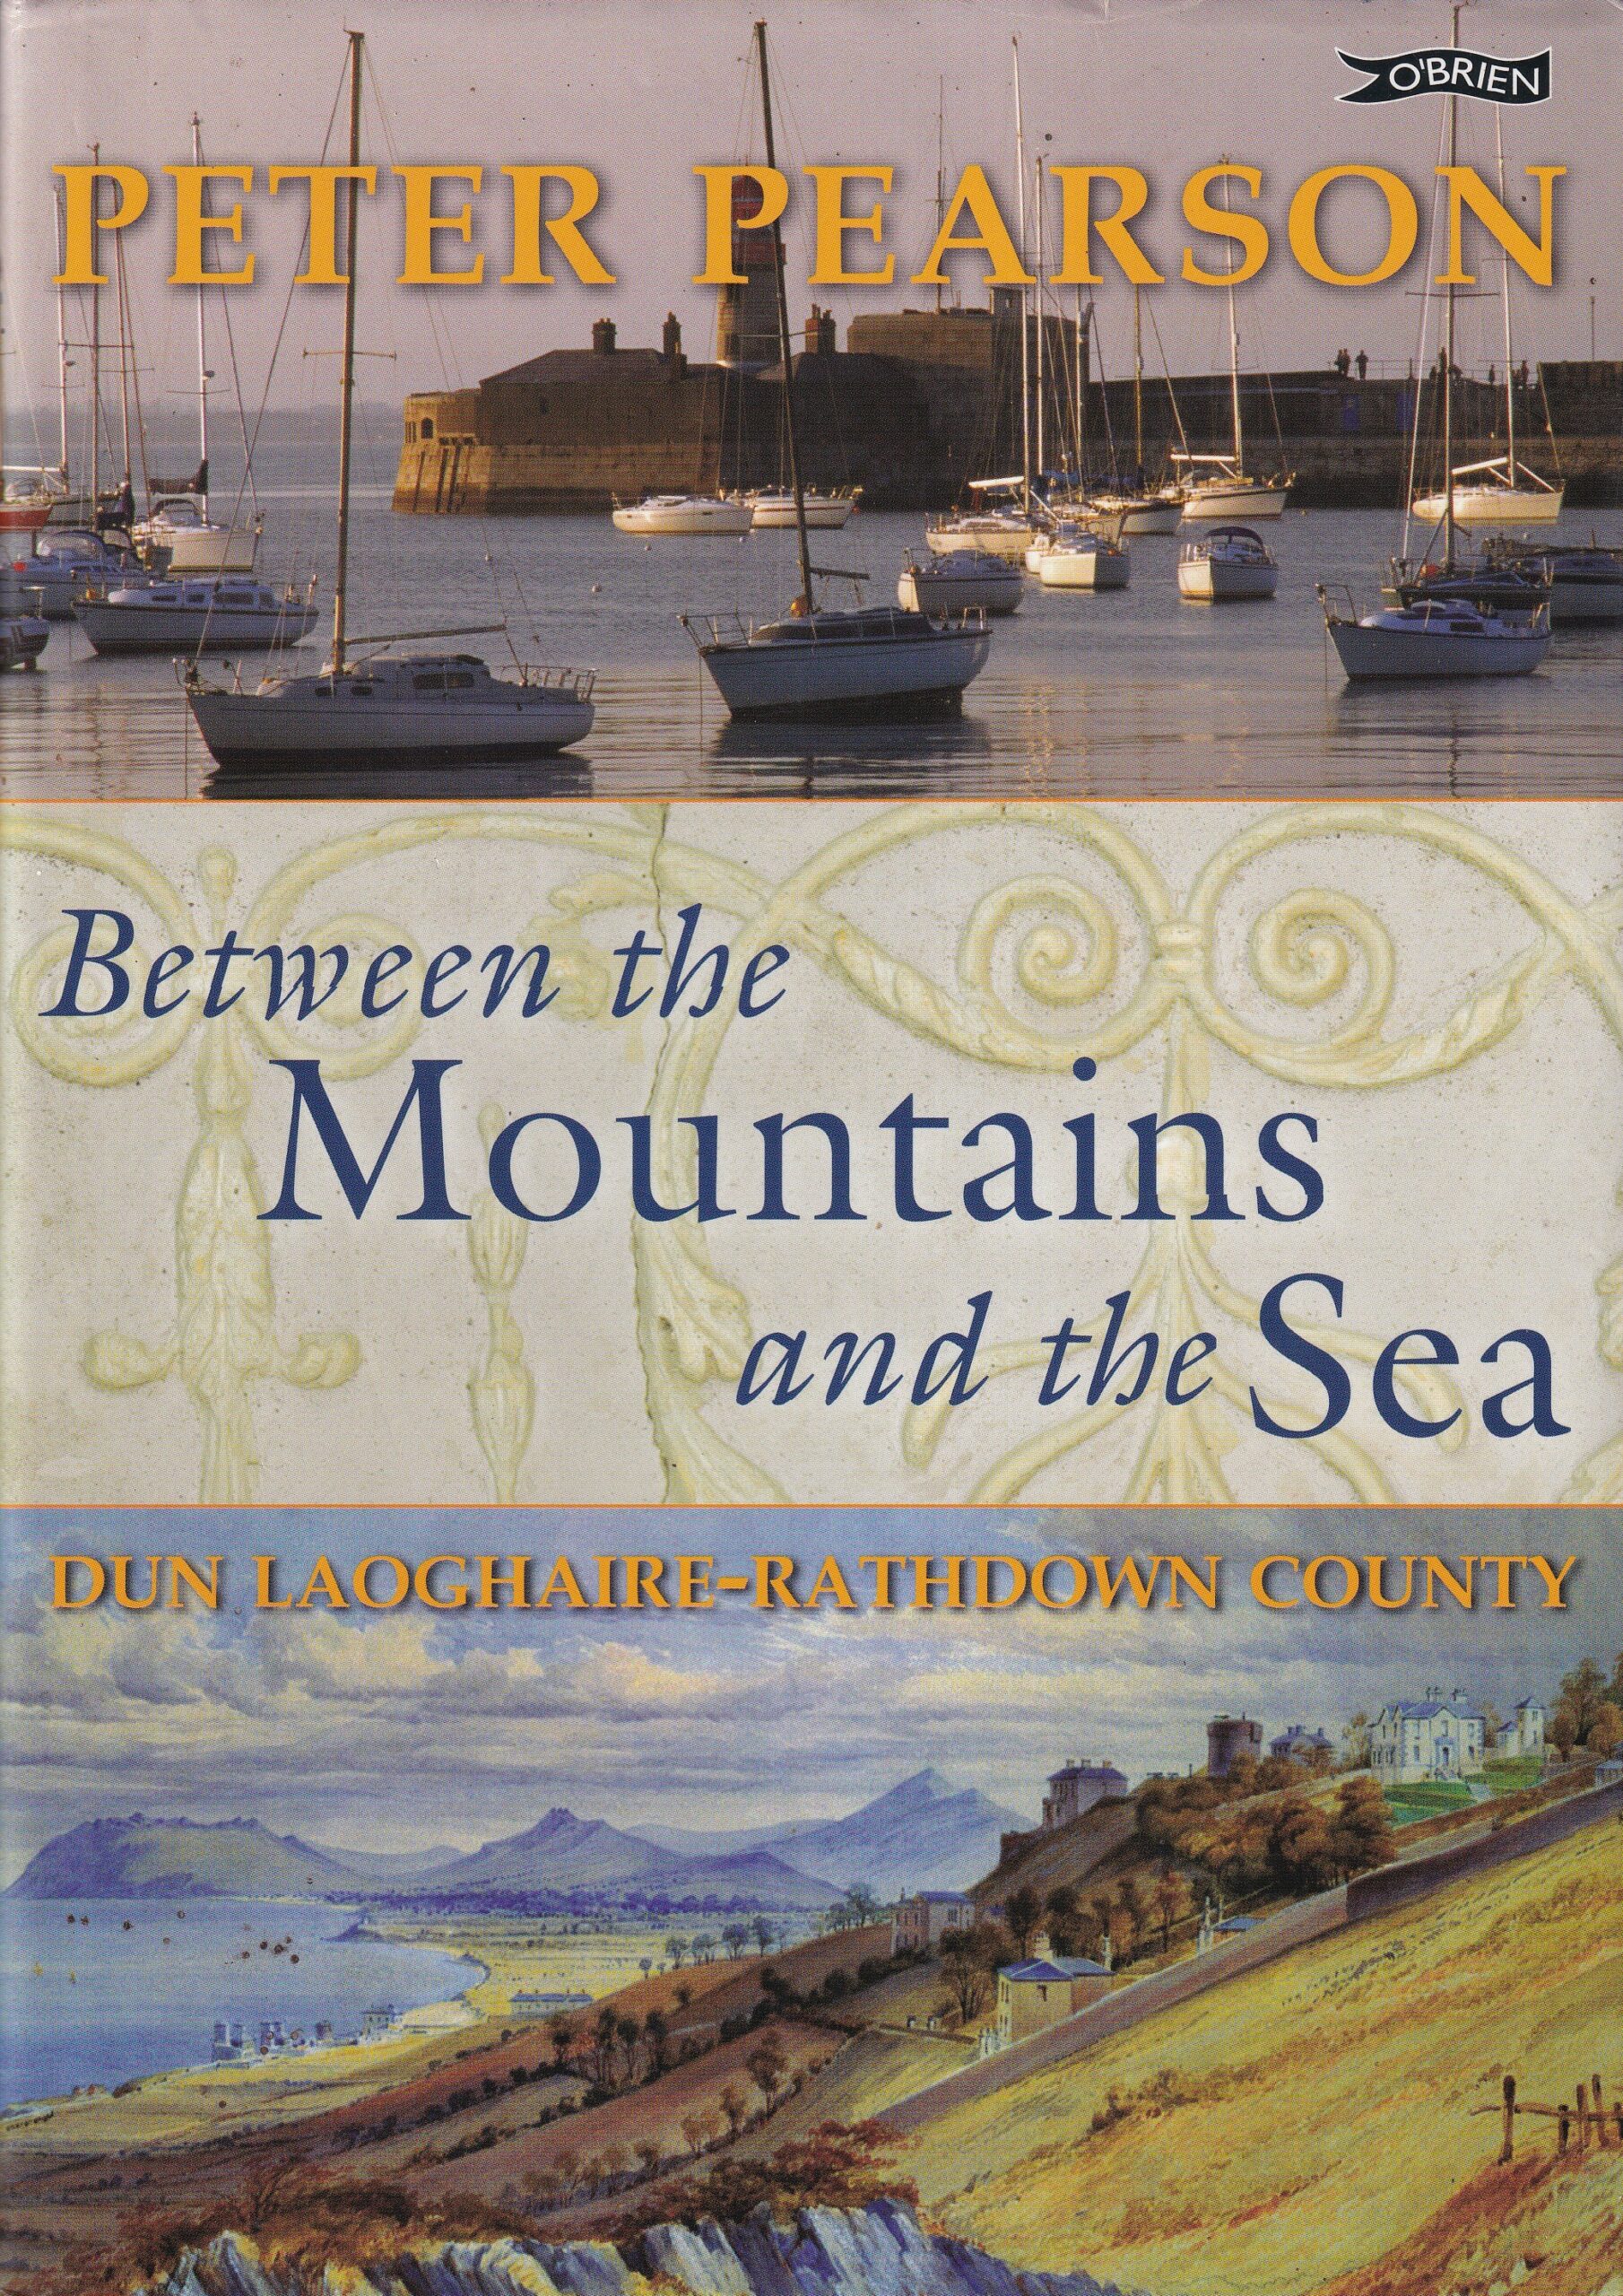 Between the Mountains and the Sea: Dun Laoghaire-Rathdown County by Peter Pearson